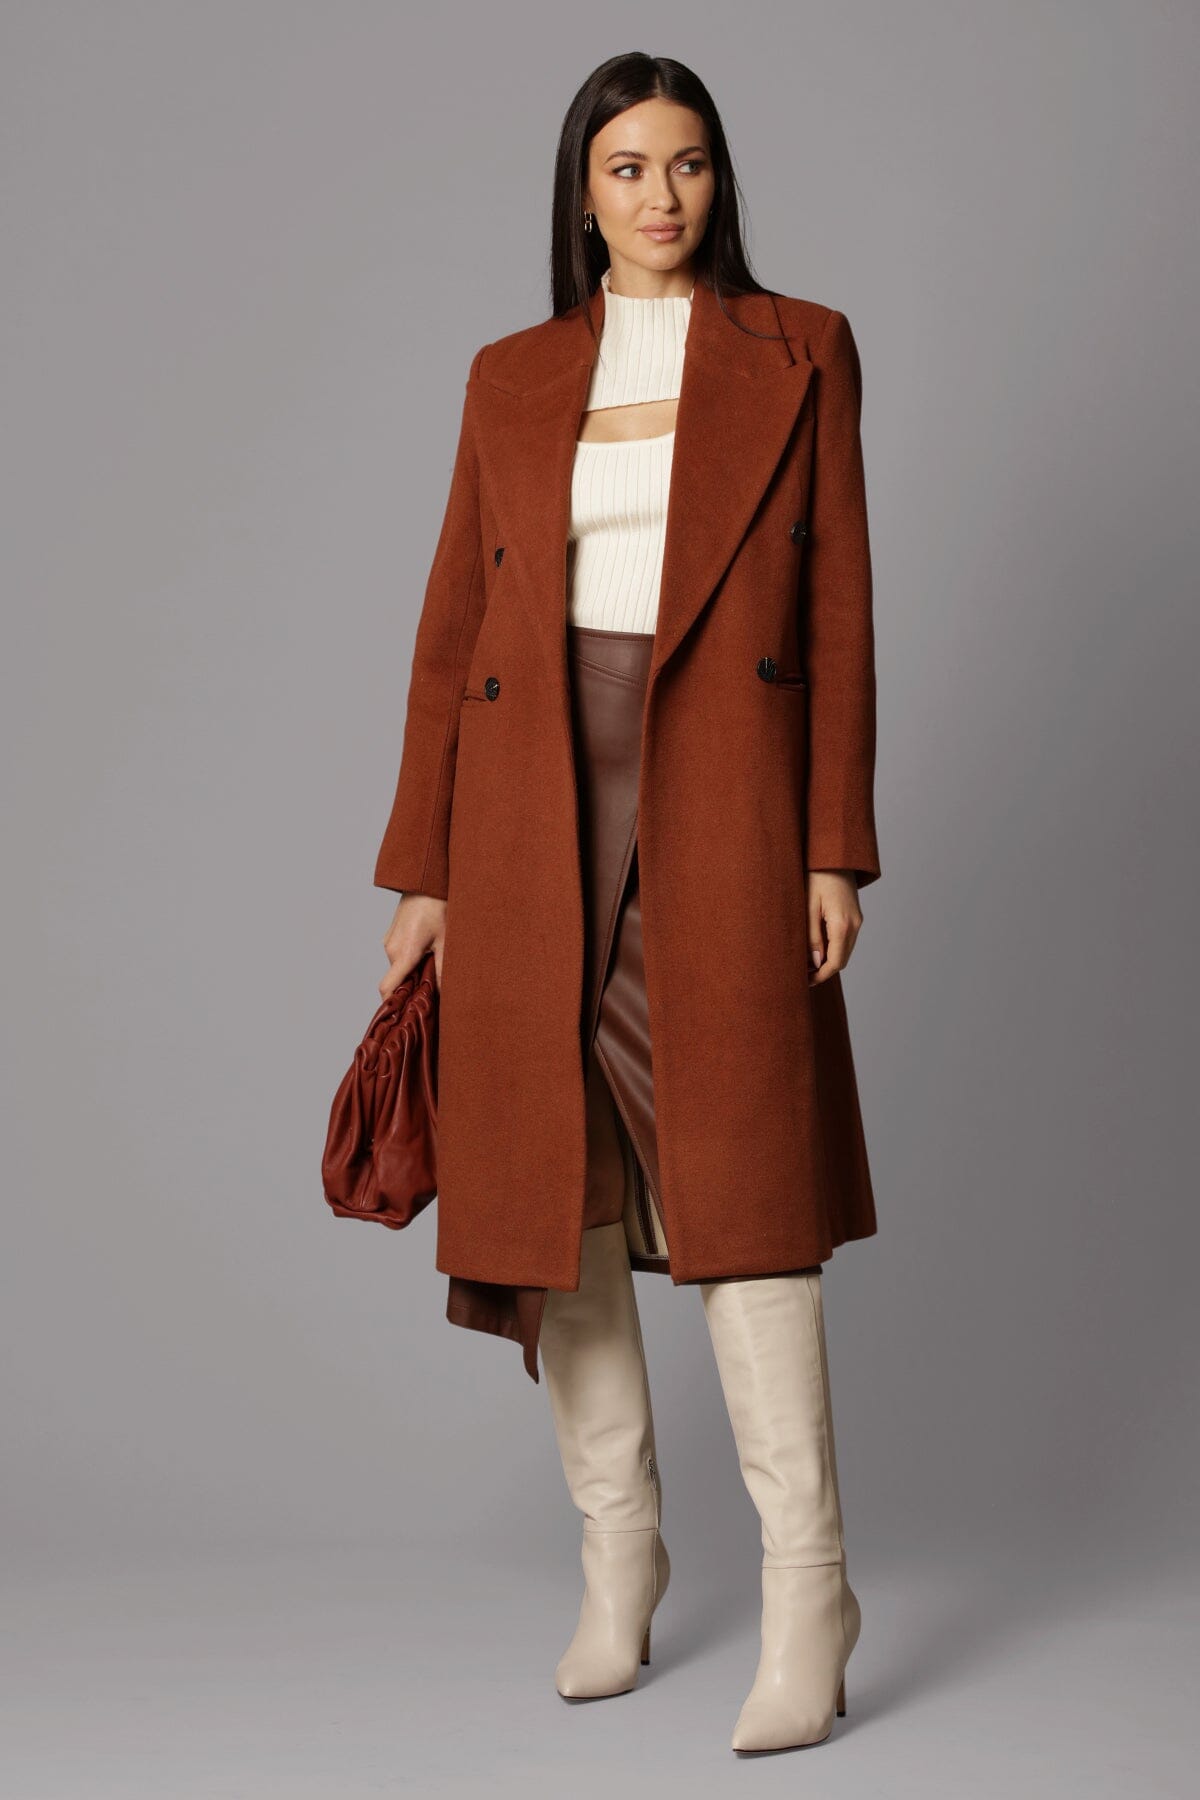 Cinnamon brown tailored double-breasted long coat by Avec Les Filles Coats & Jackets